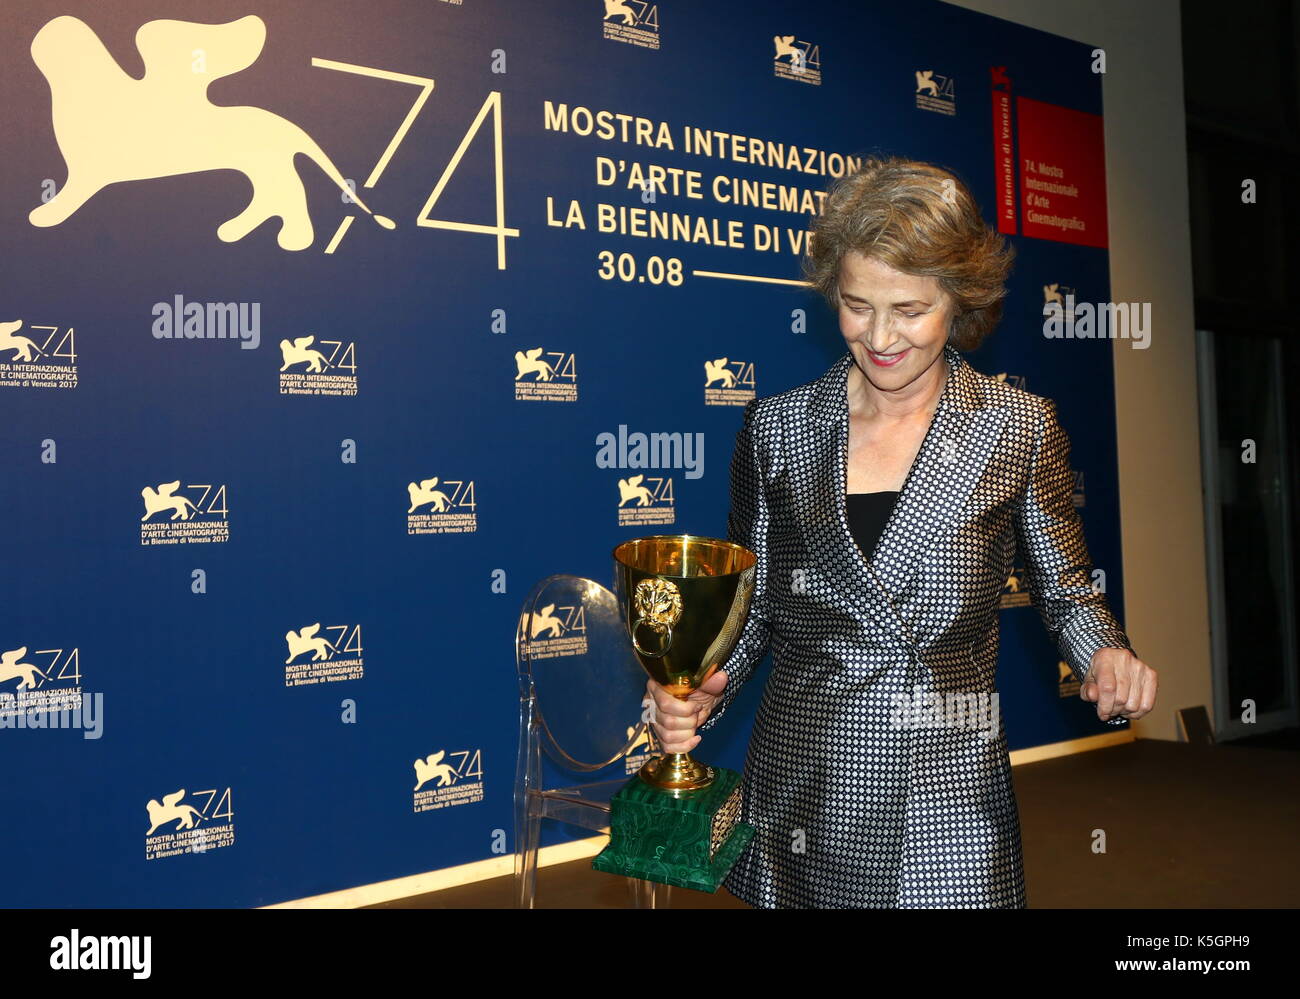 Venice, Italy. 9th September, 2017. Actress Charlotte Rampling poses during a award photocall after she receives the Coppa Volpi for Best Actress for her character in the movie 'Hannah' during the 74th Venice International Film Festival at Lido of Venice on 9th September, 2017. Credit: Andrea Spinelli/Alamy Live News Stock Photo